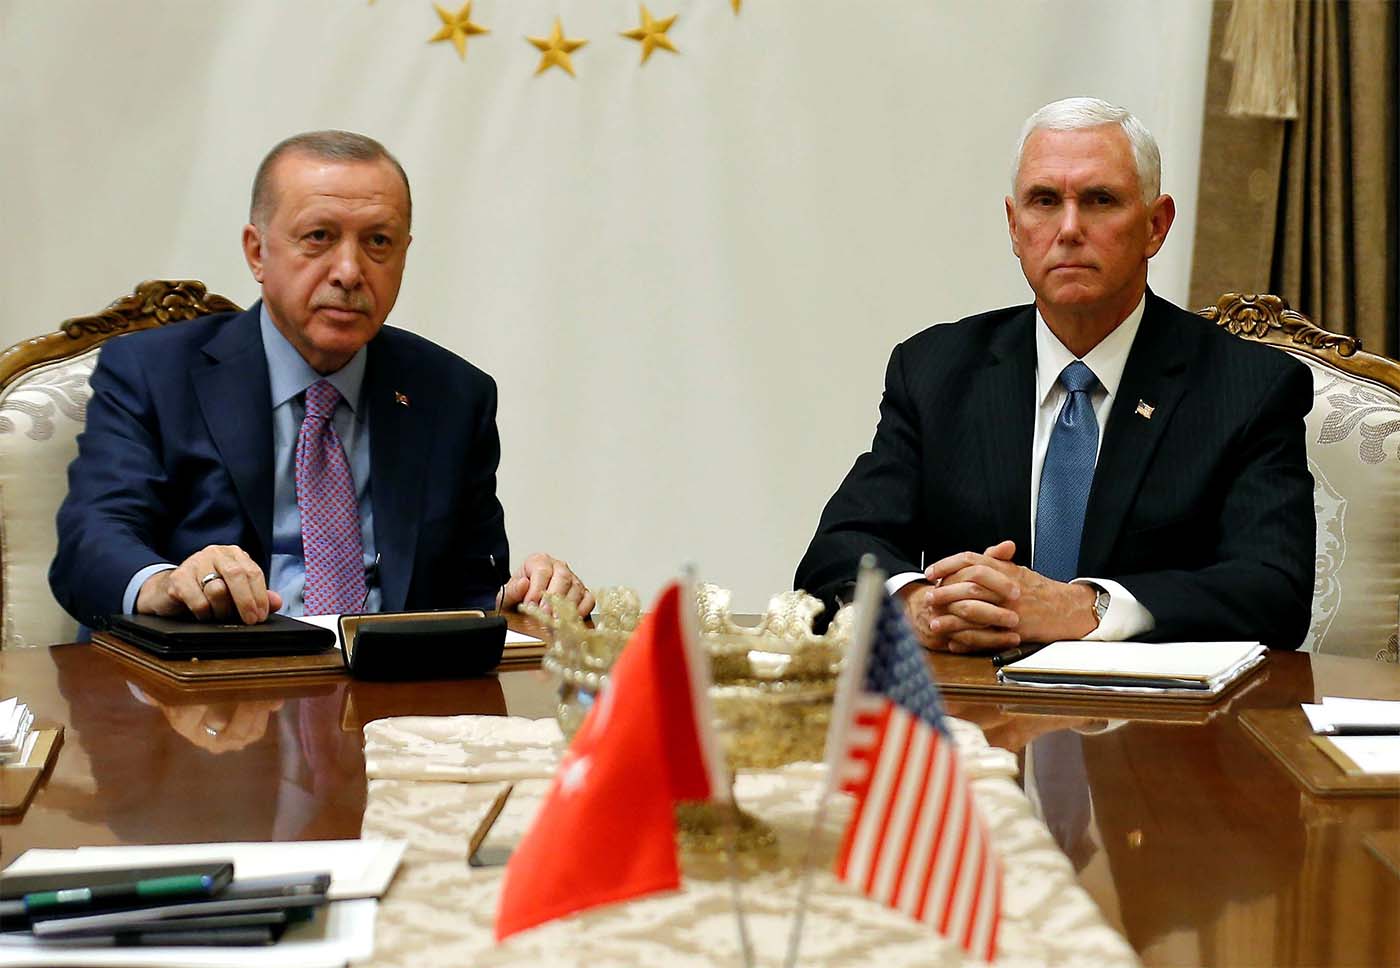 US Vice President Mike Pence meets with Turkish President Tayyip Erdogan at the Presidential Palace in Ankara